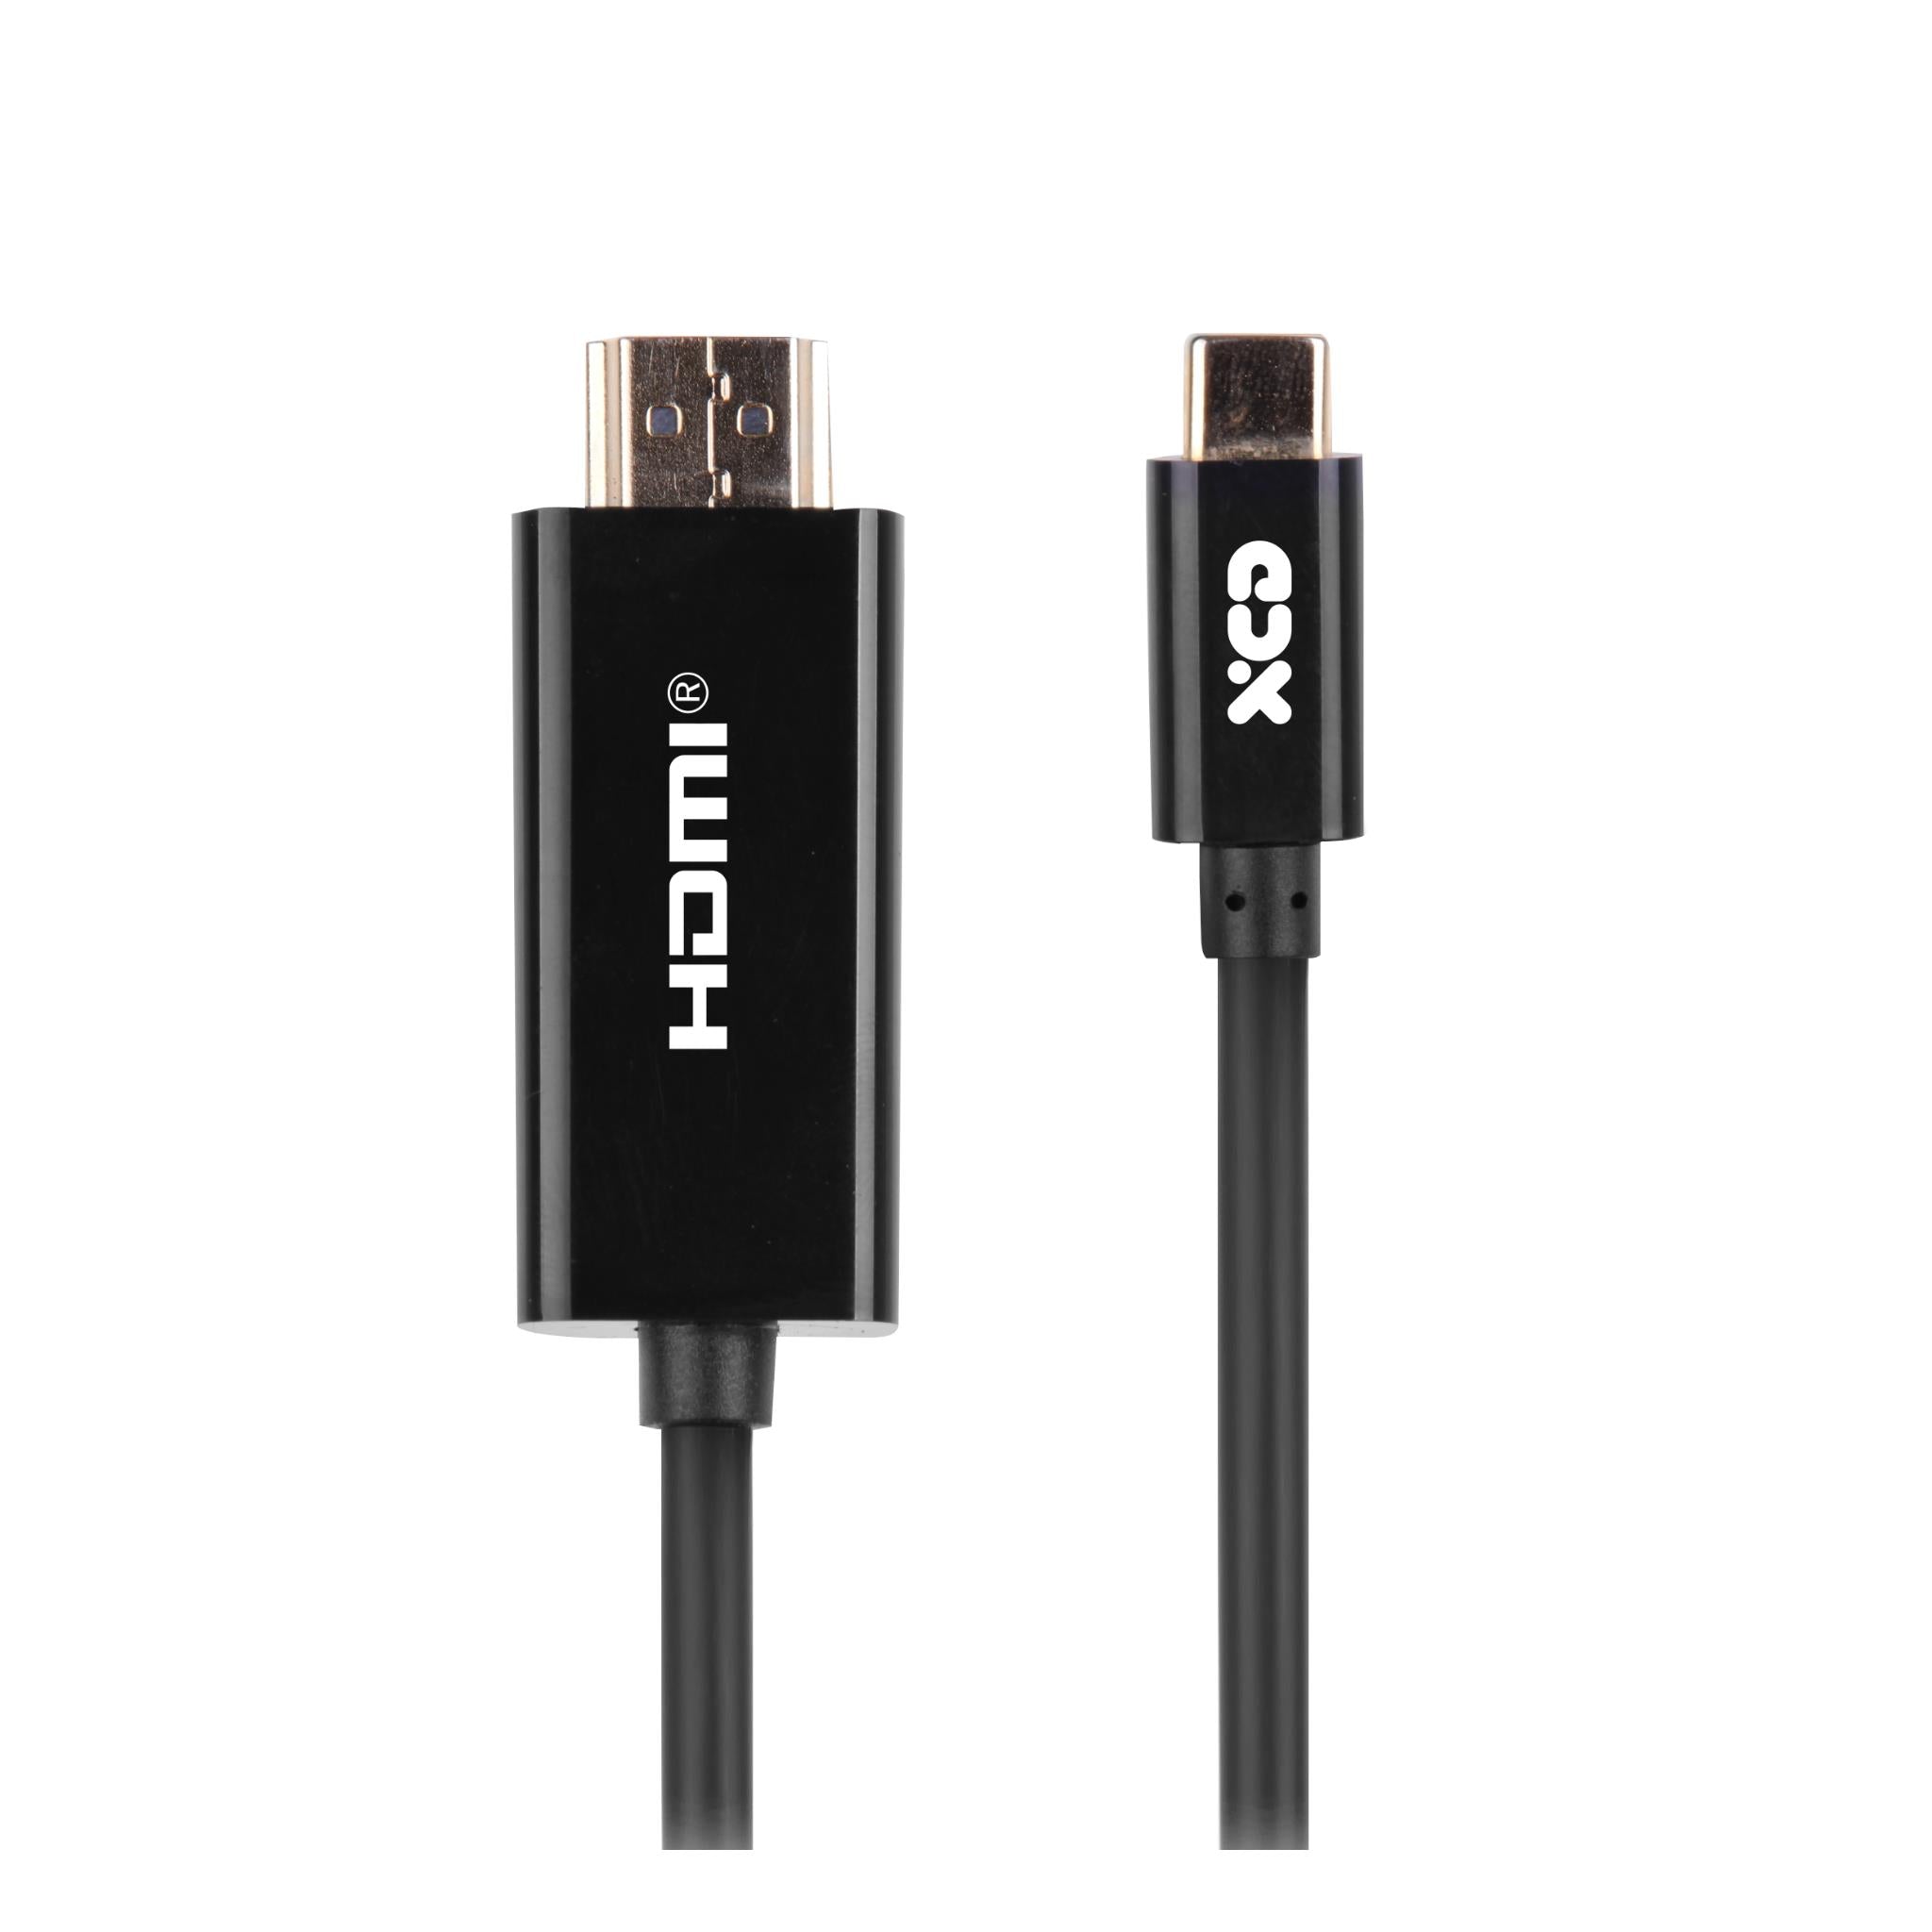 xcd essentials usb-c to hdmi cable (1m)